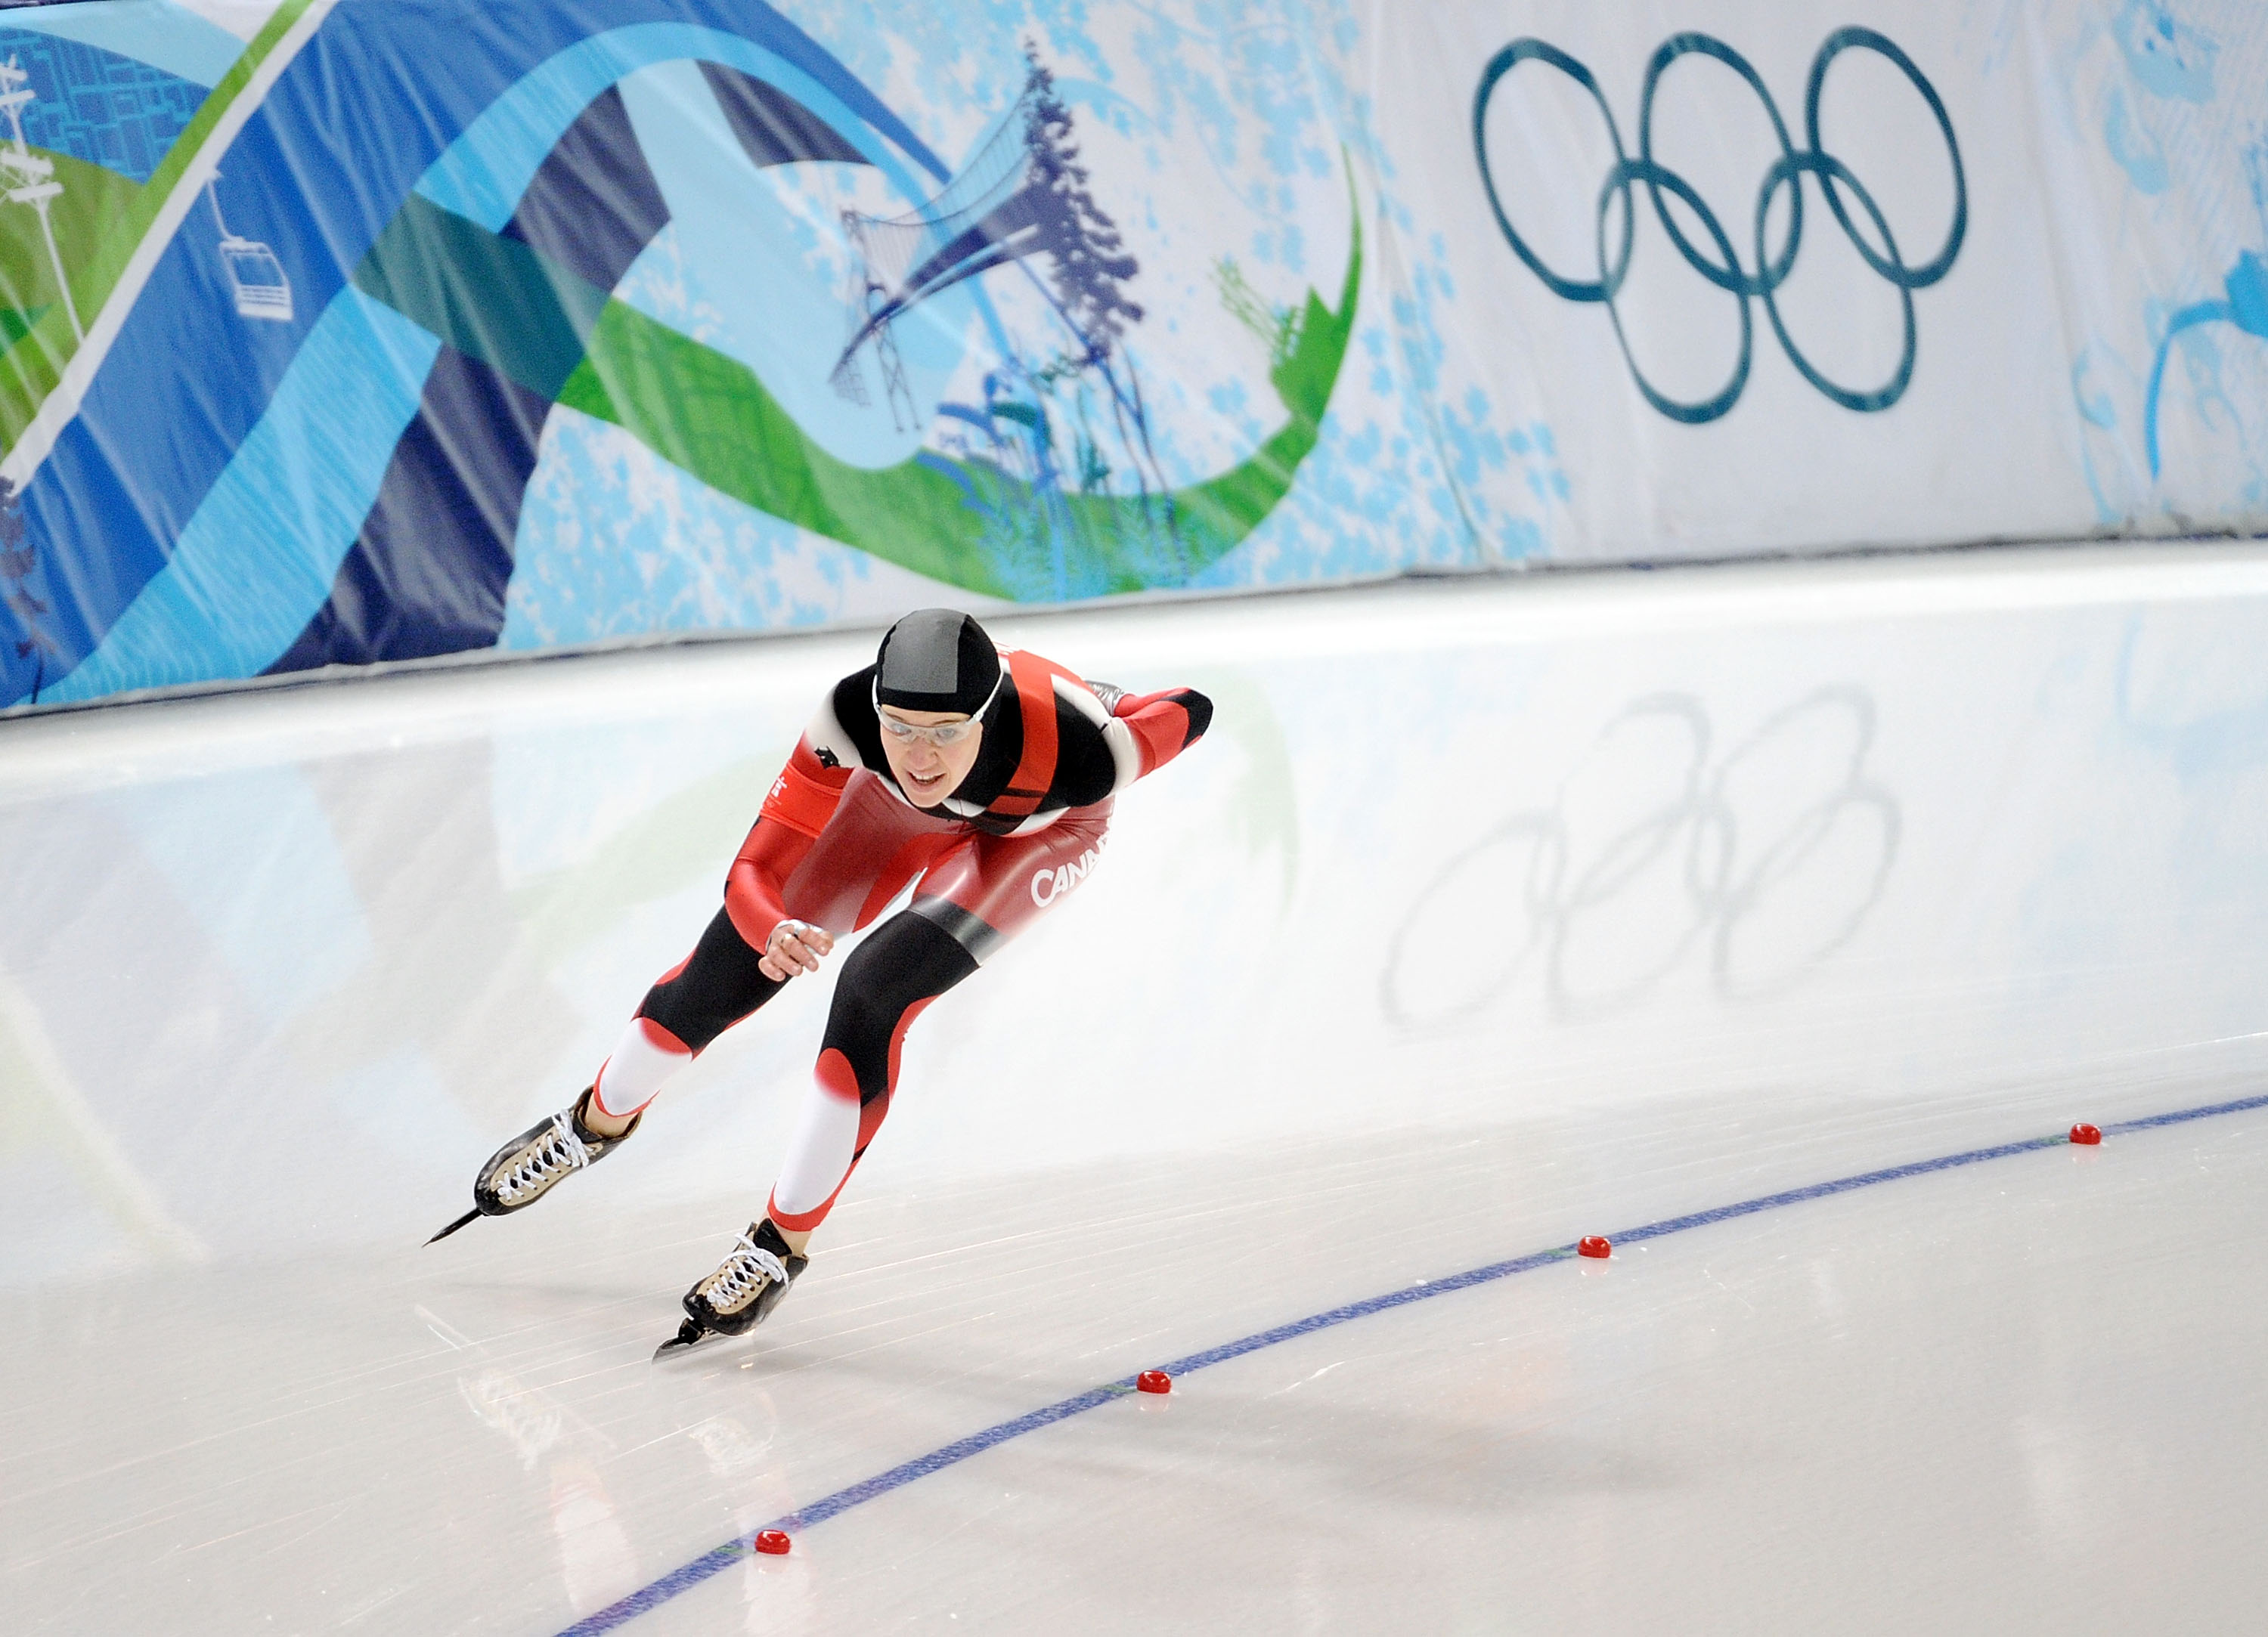 Clara Hughes of Canada on the ice during the Ladies' 5000m Speed Skating finals during the 2010 Vancouver Winter Olympics in Canada. Harry How—Getty Images (Harry How—Getty Images)